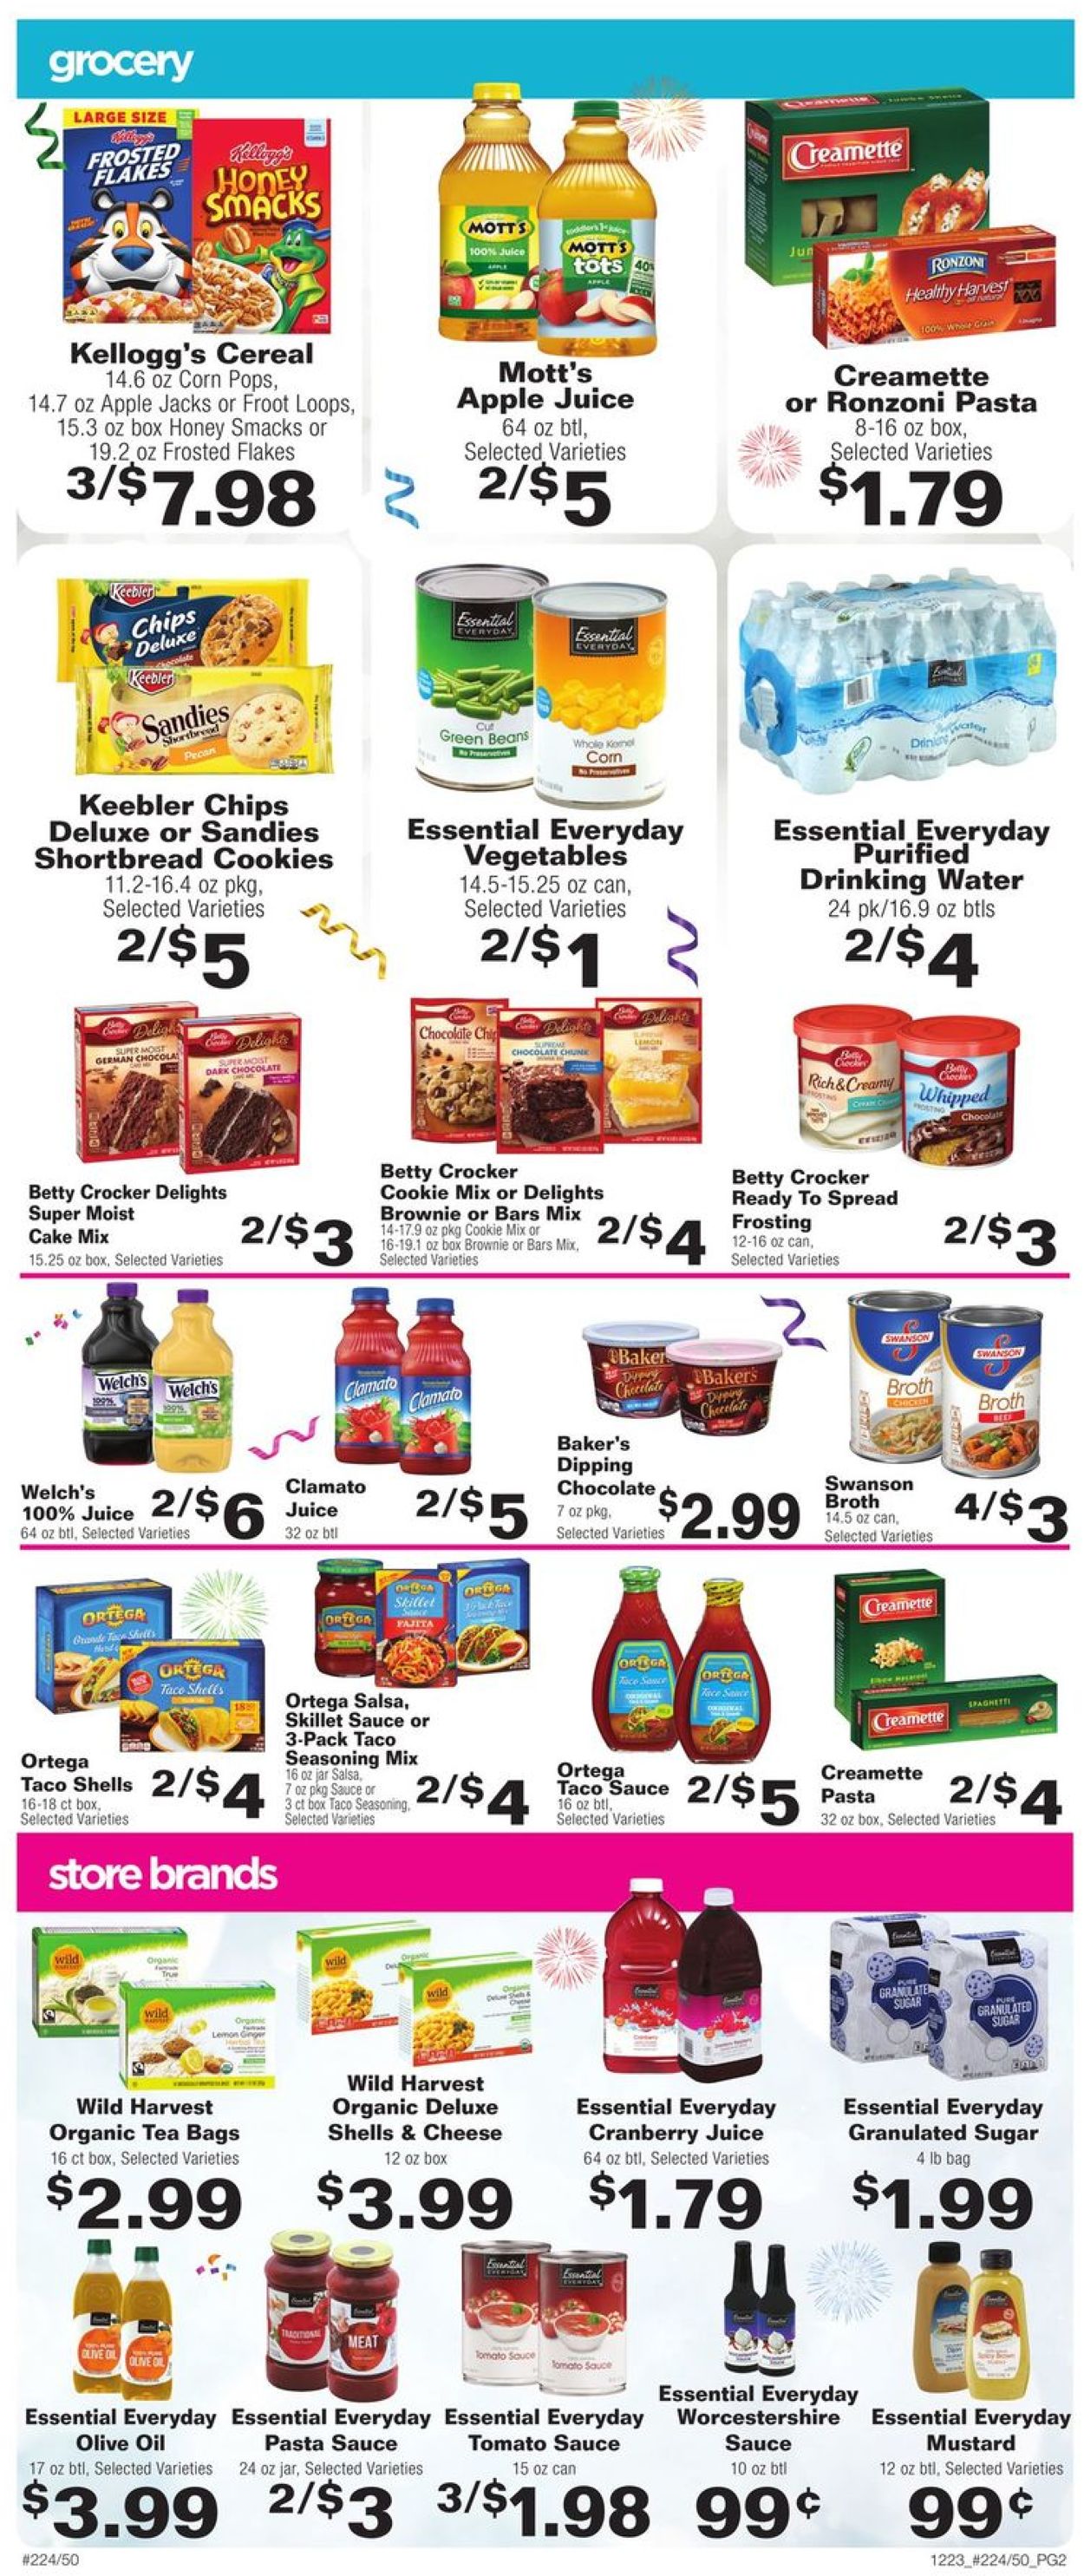 Catalogue County Market - New Year's Ad 2019/2020 from 12/23/2019